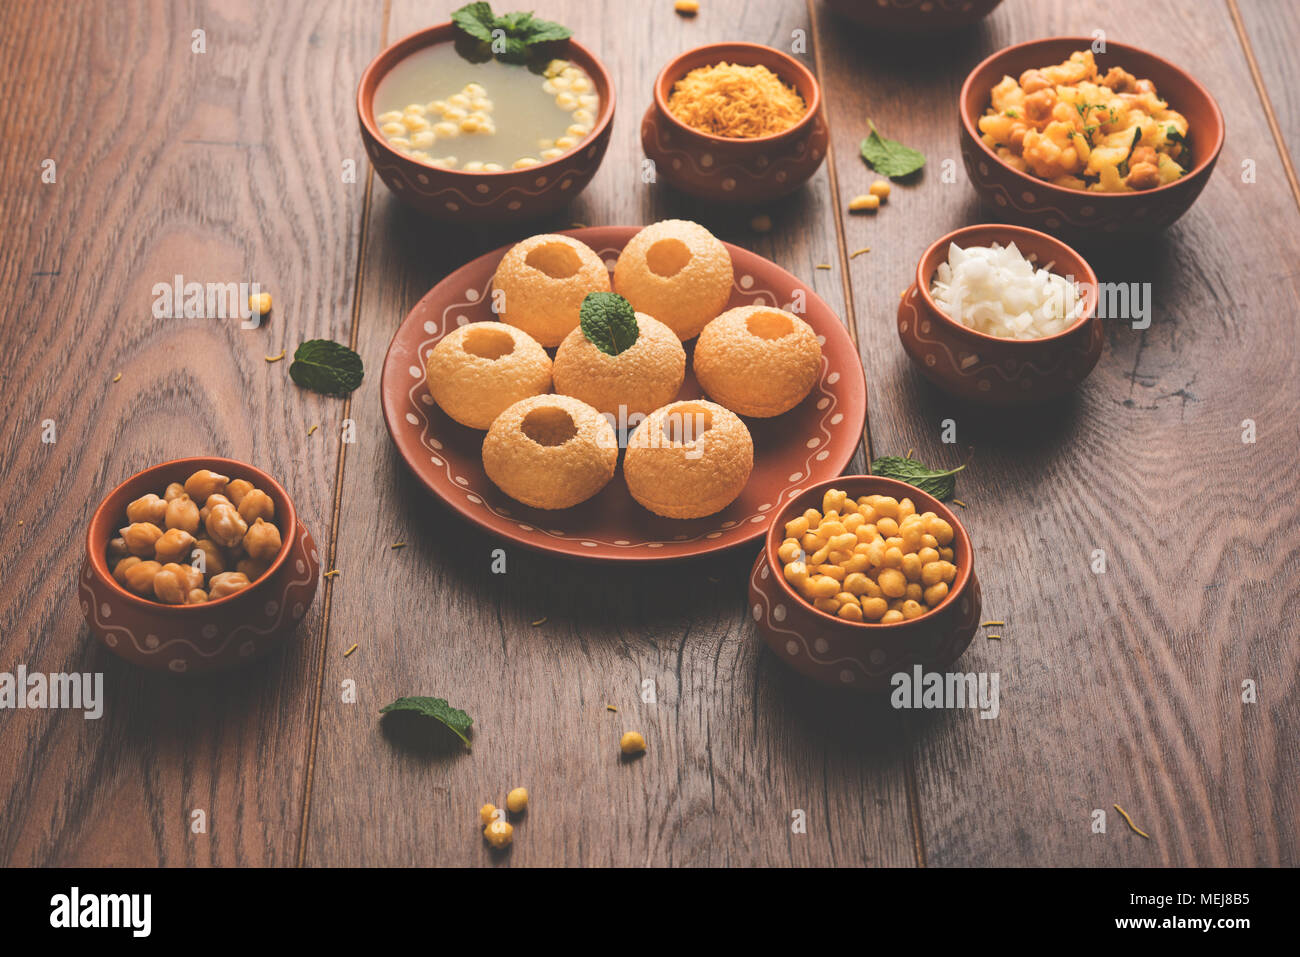 Pani Puri is Indian chat item served in a terracotta bowls and plate which is a popular readside snack from India Stock Photo